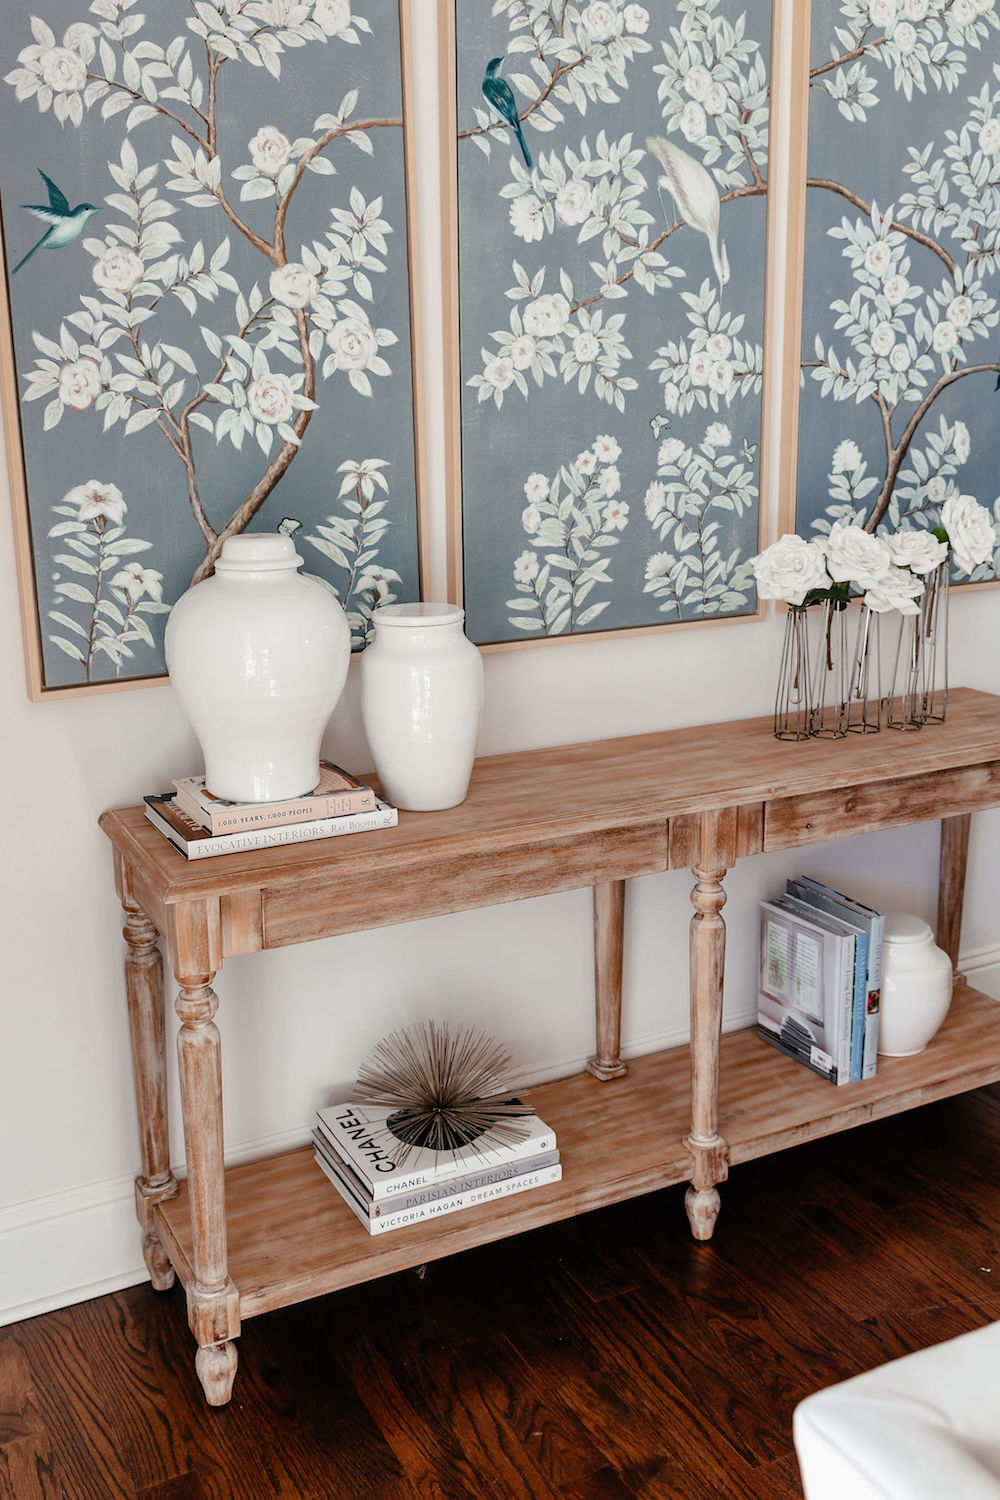 Living Room console styled with books and white ceramic vases